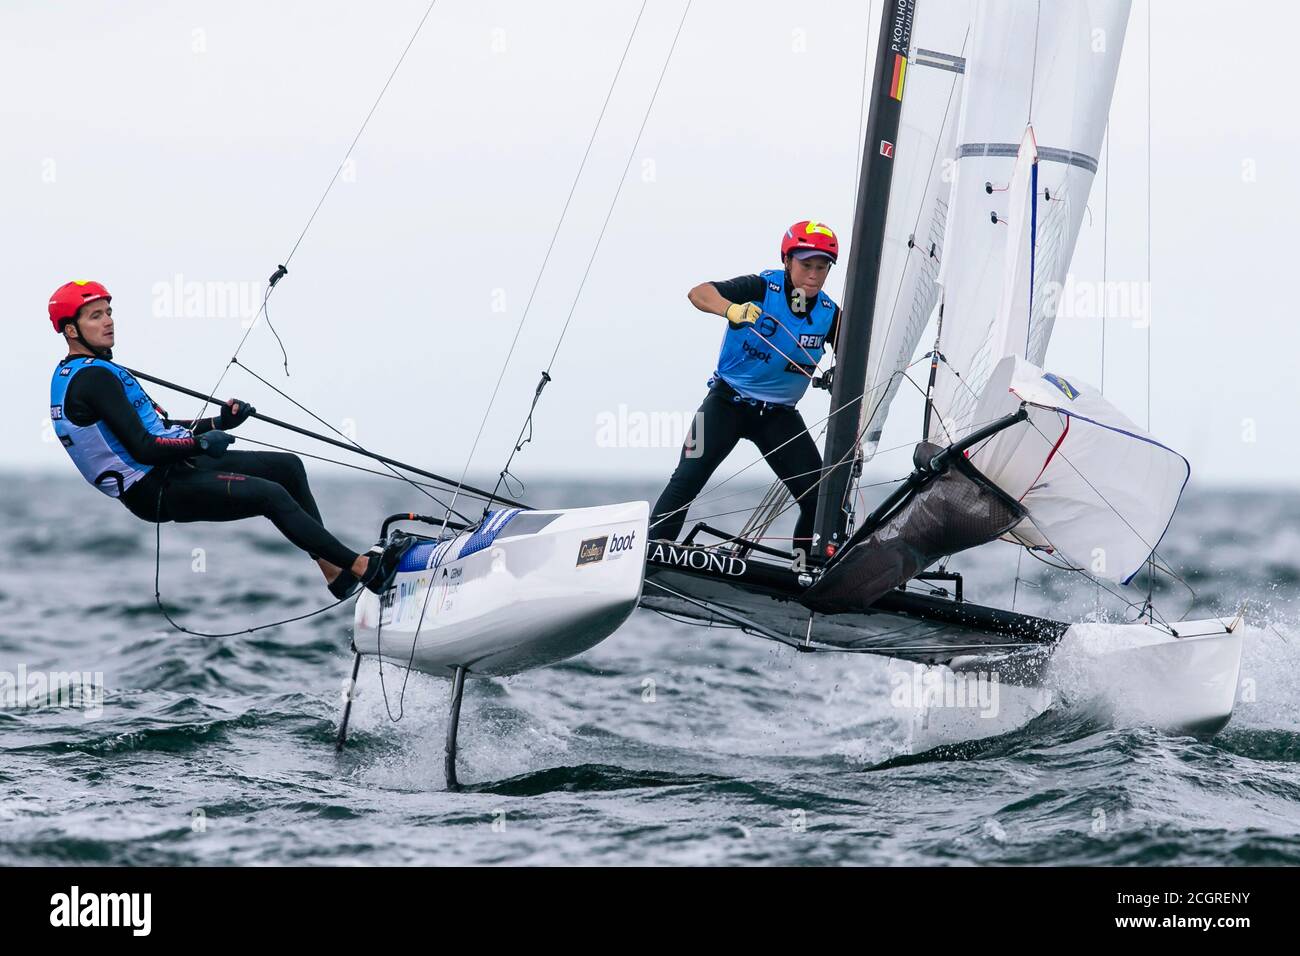 Kiel, Germany. 12th Sep, 2020. The Nacra-17-sailors Paul Kohlhoff (l) and  Alica Stuhlemmer (Kieler Yacht-Club) are on course during a race at the  126th Kieler Woche in the front places. The Kieler